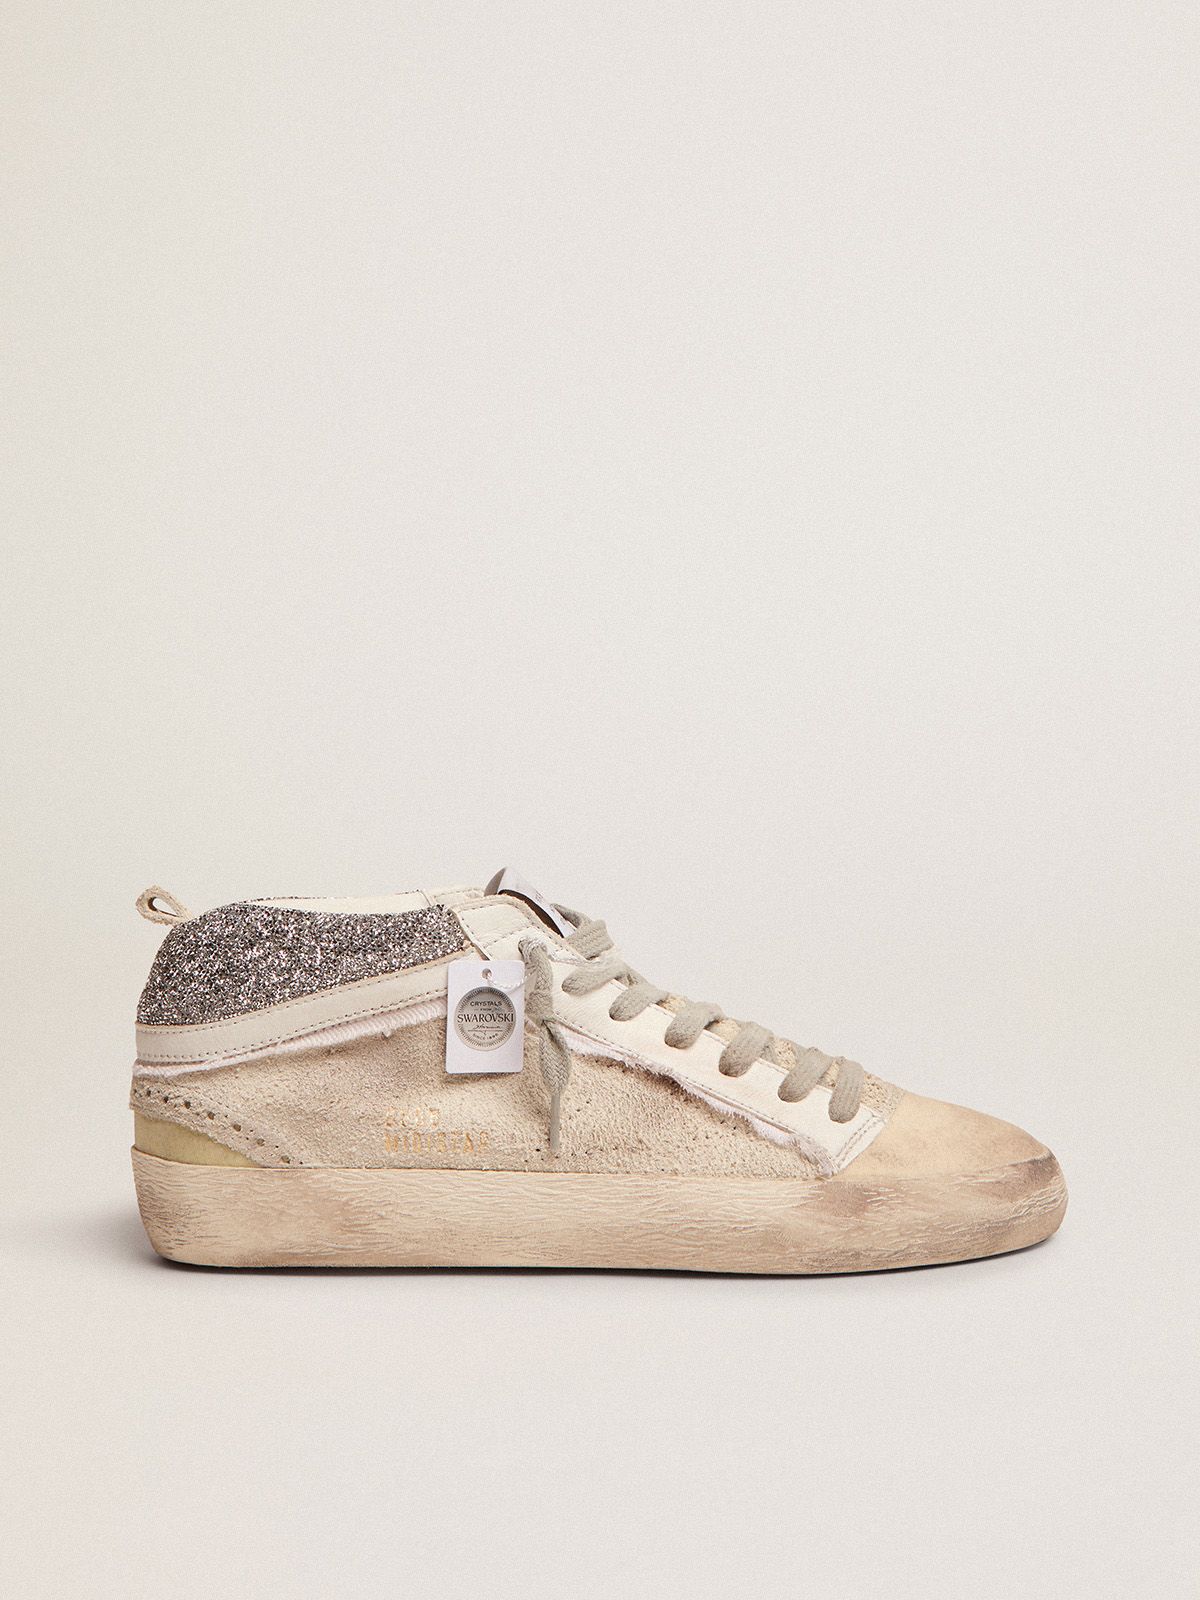 golden goose and Swarovski with leather Mid heel crystal Star upper sneakers off-white tab reverse